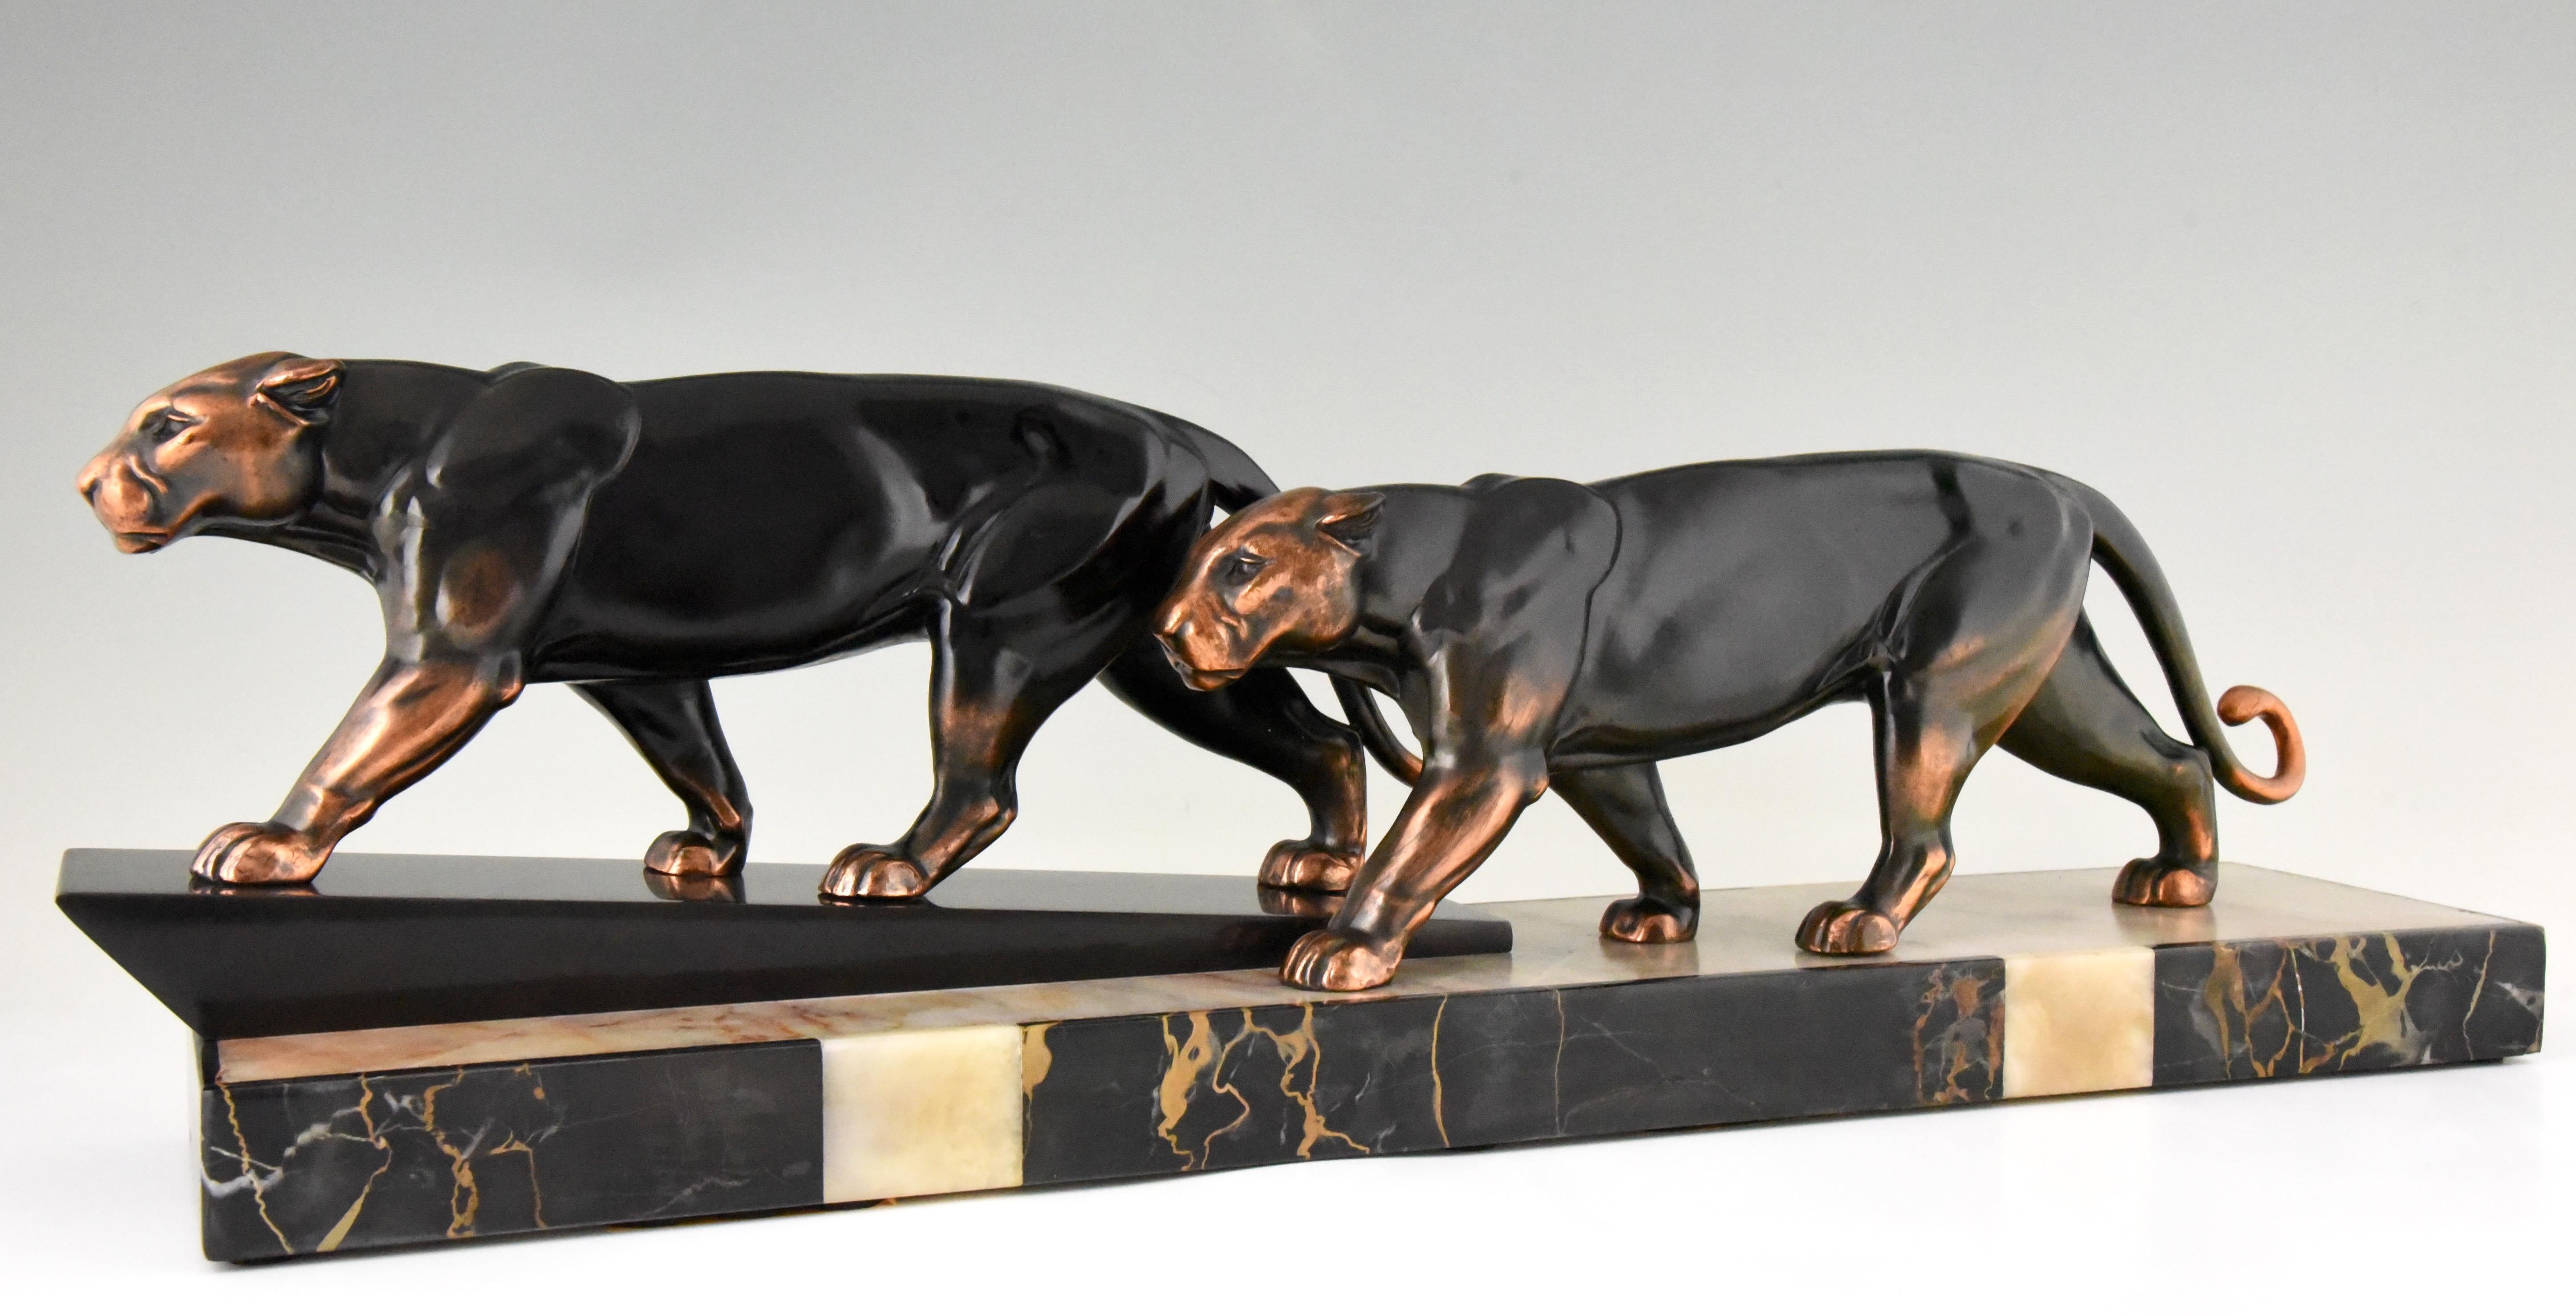 Art Deco group of two walking panthers by the French artist Alexandre Ouline in Art Metal with lovely patina on a multi-color marble base, circa 1930.
“Animals in bronze” by Christopher Payne. Antique collectors club. ?“Dictionnaire des peintres,